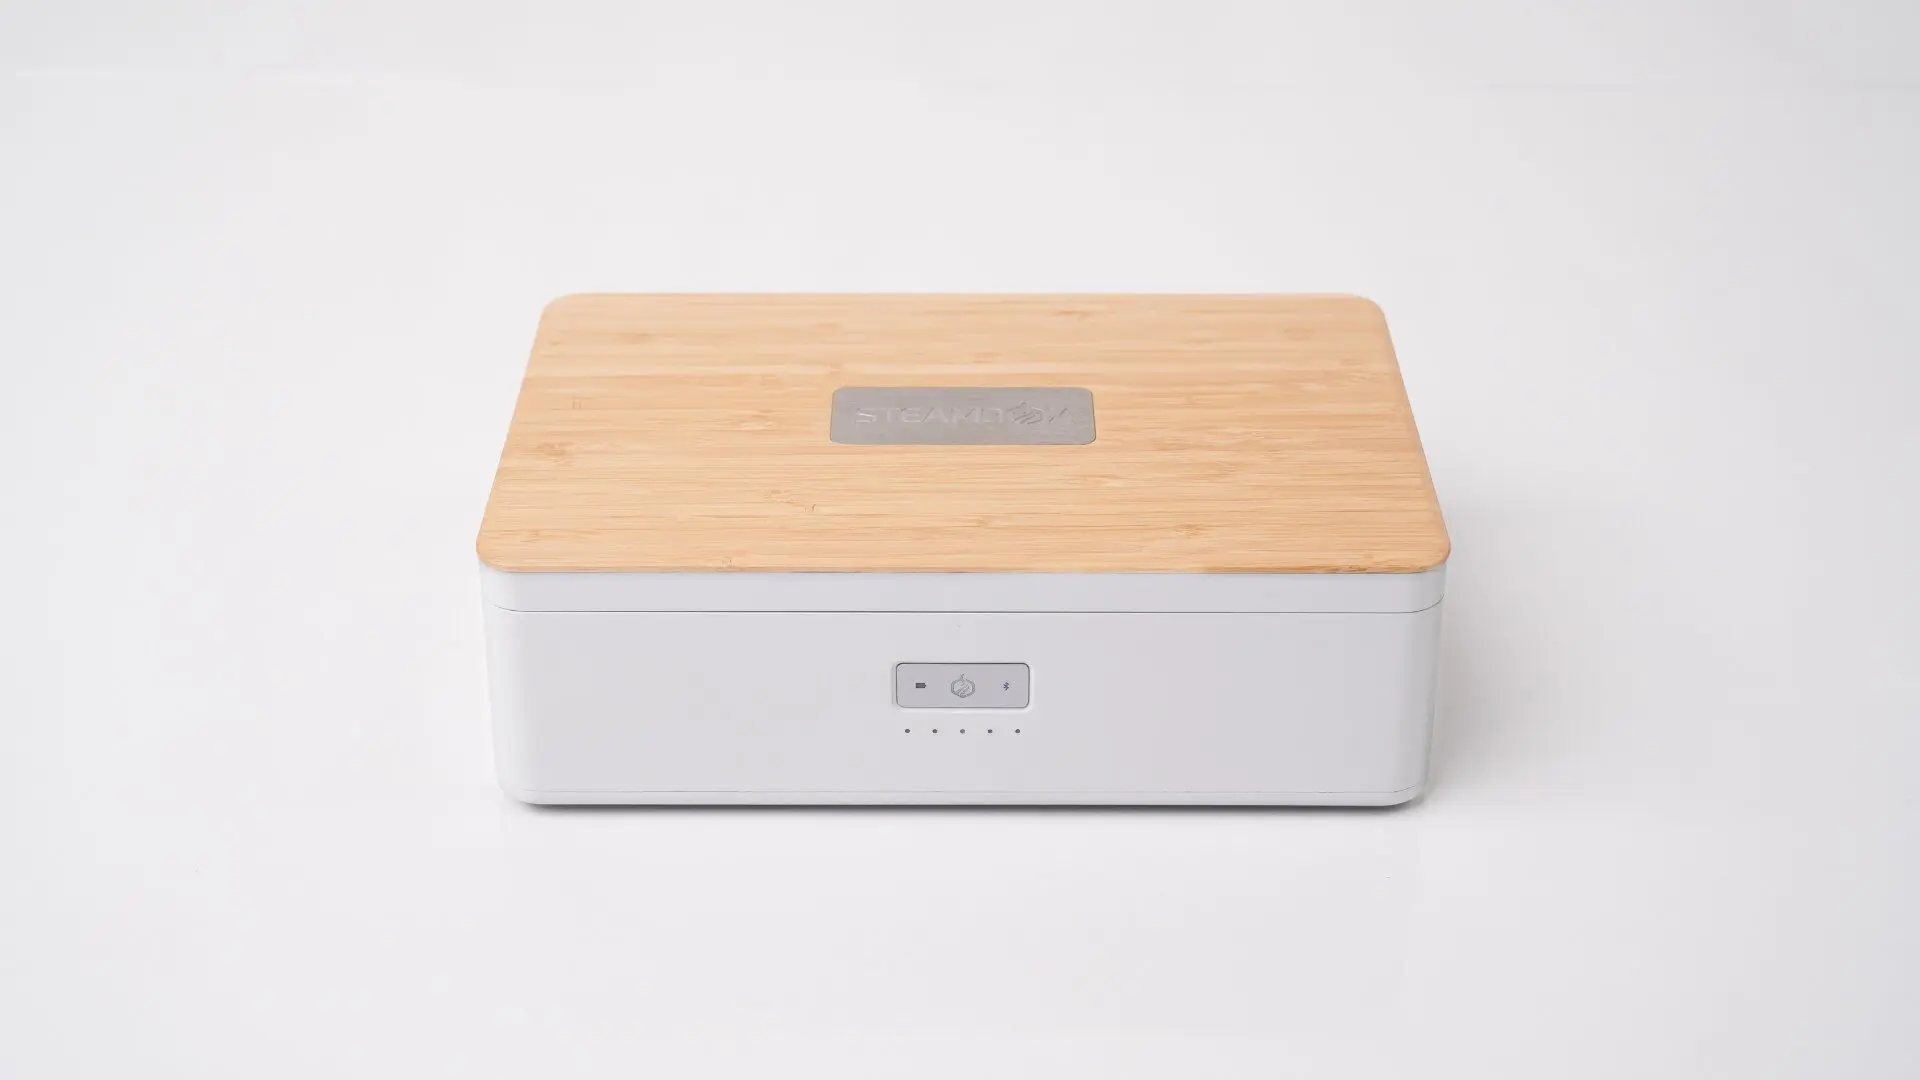 Steambox: the self-heating lunch box